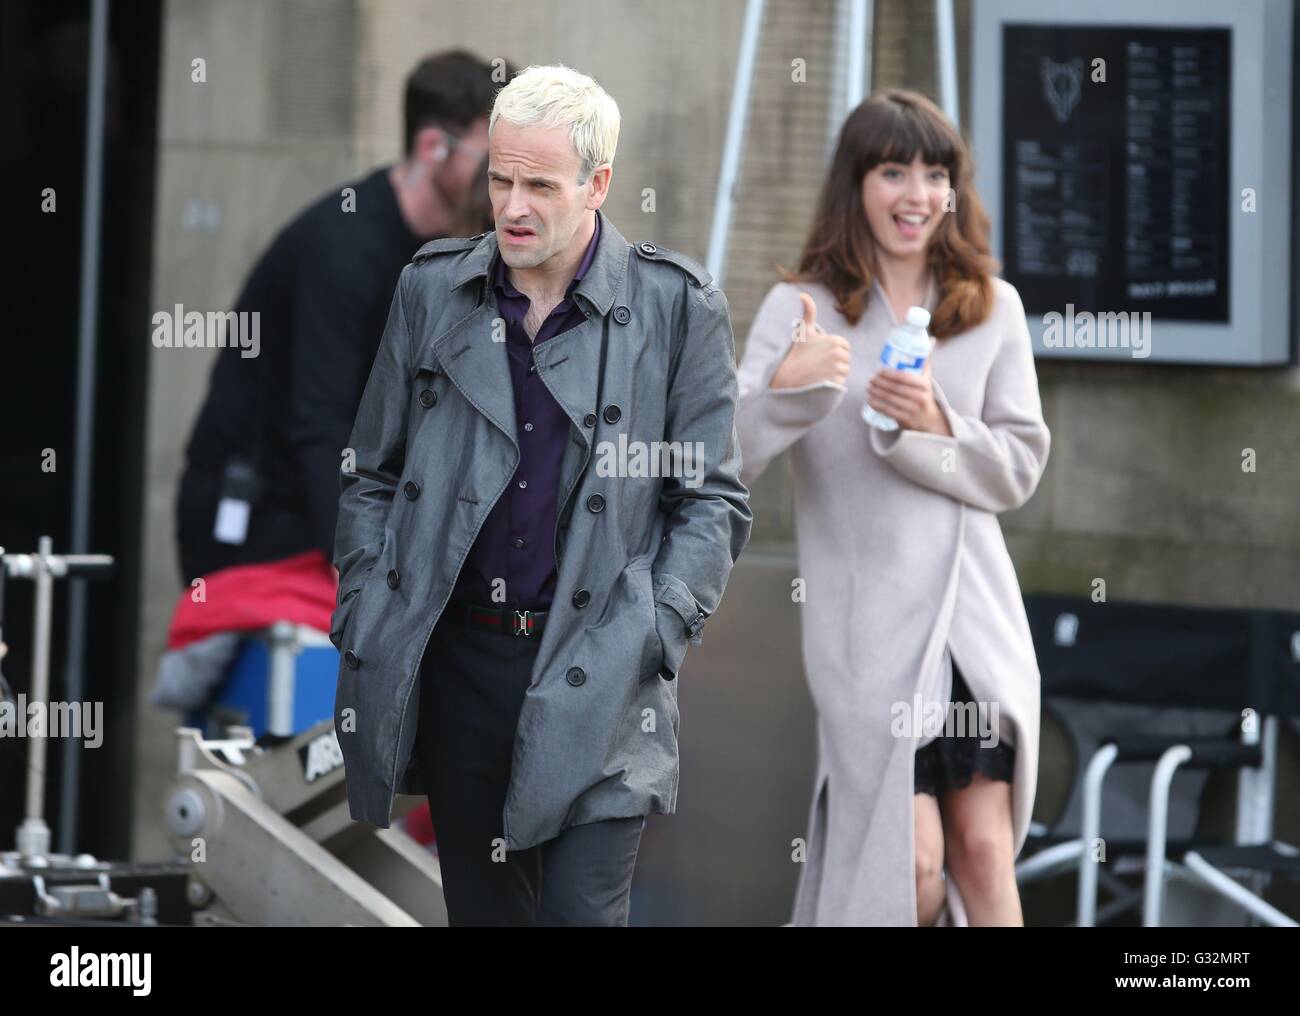 Actor Jonny Lee Miller (left) with an unknow actress during the filming of a scene from his new film Trainspotting 2 which is being filmed in Edinburgh. Stock Photo